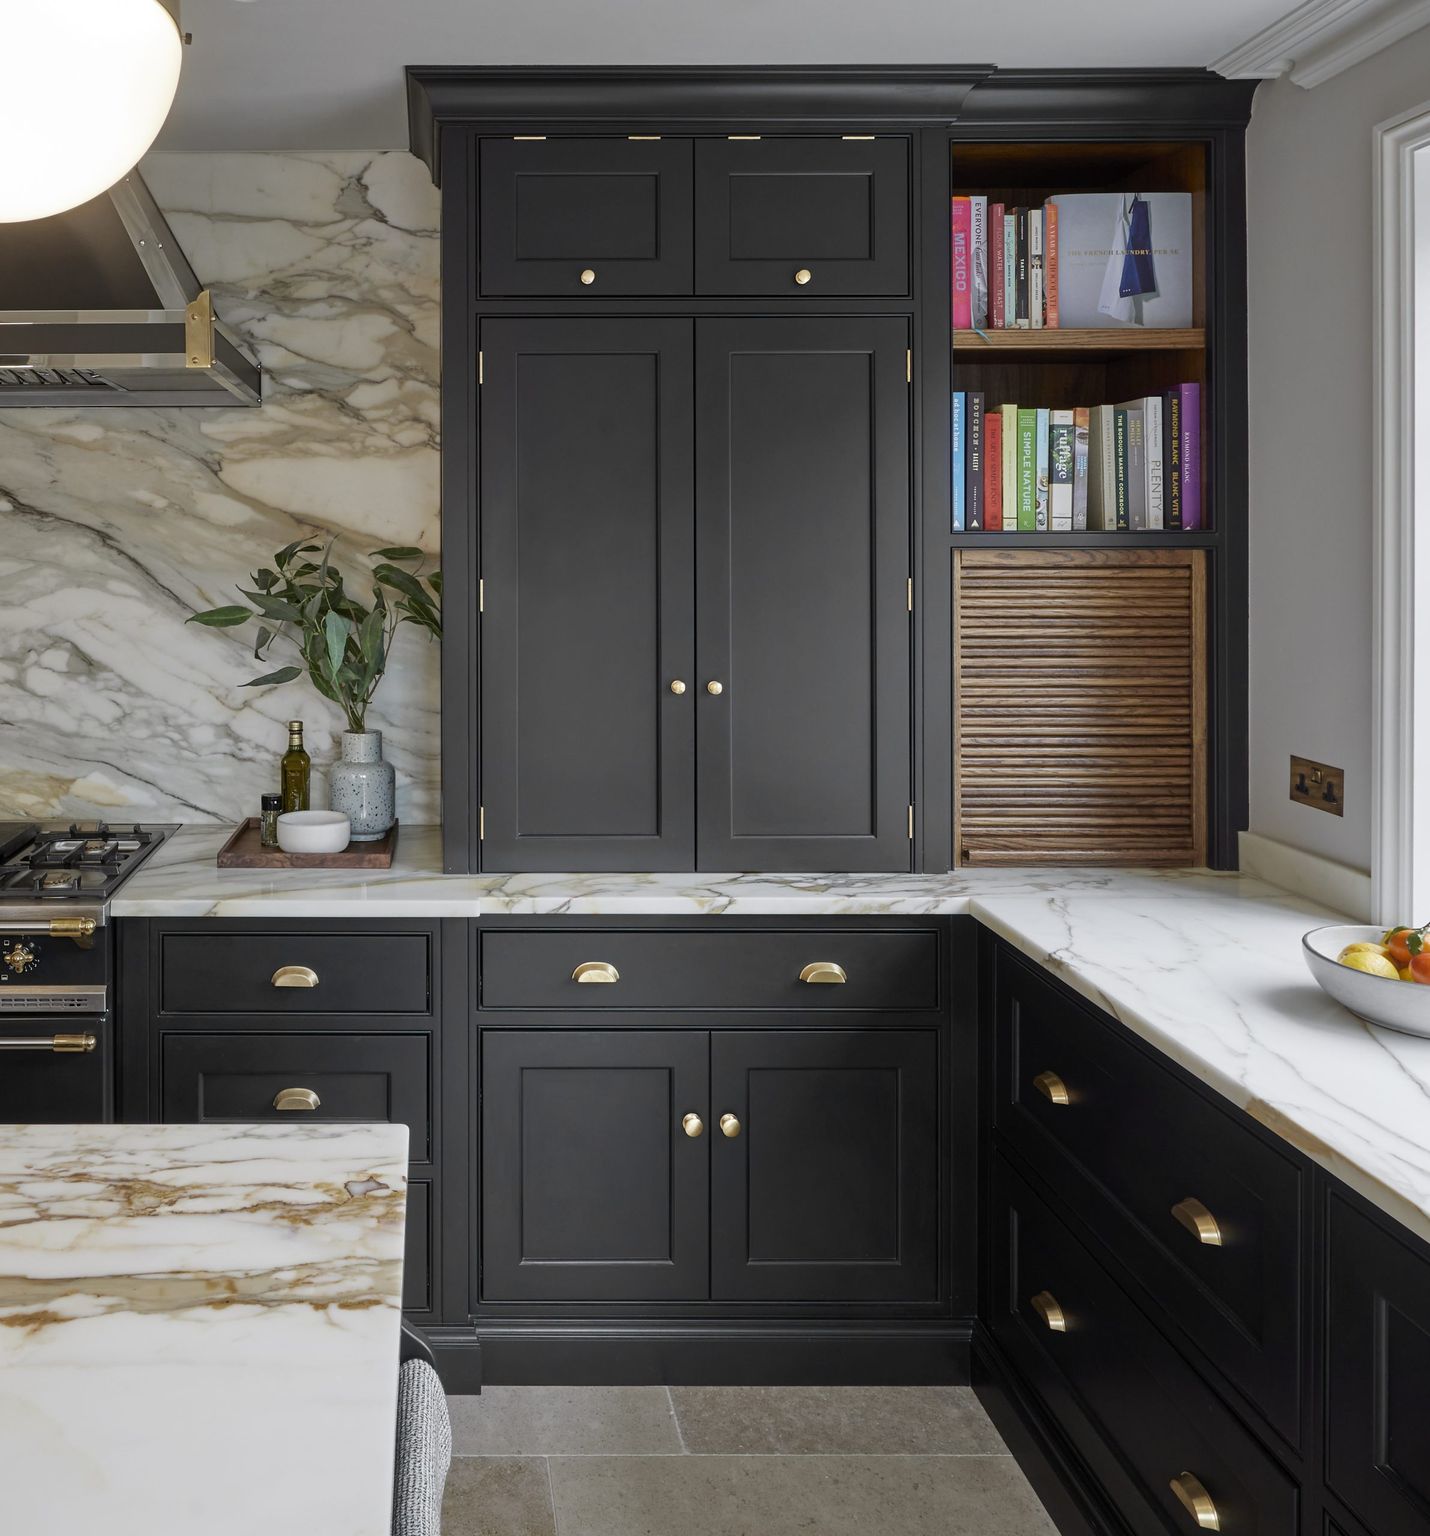 Should I use marble in my kitchen?